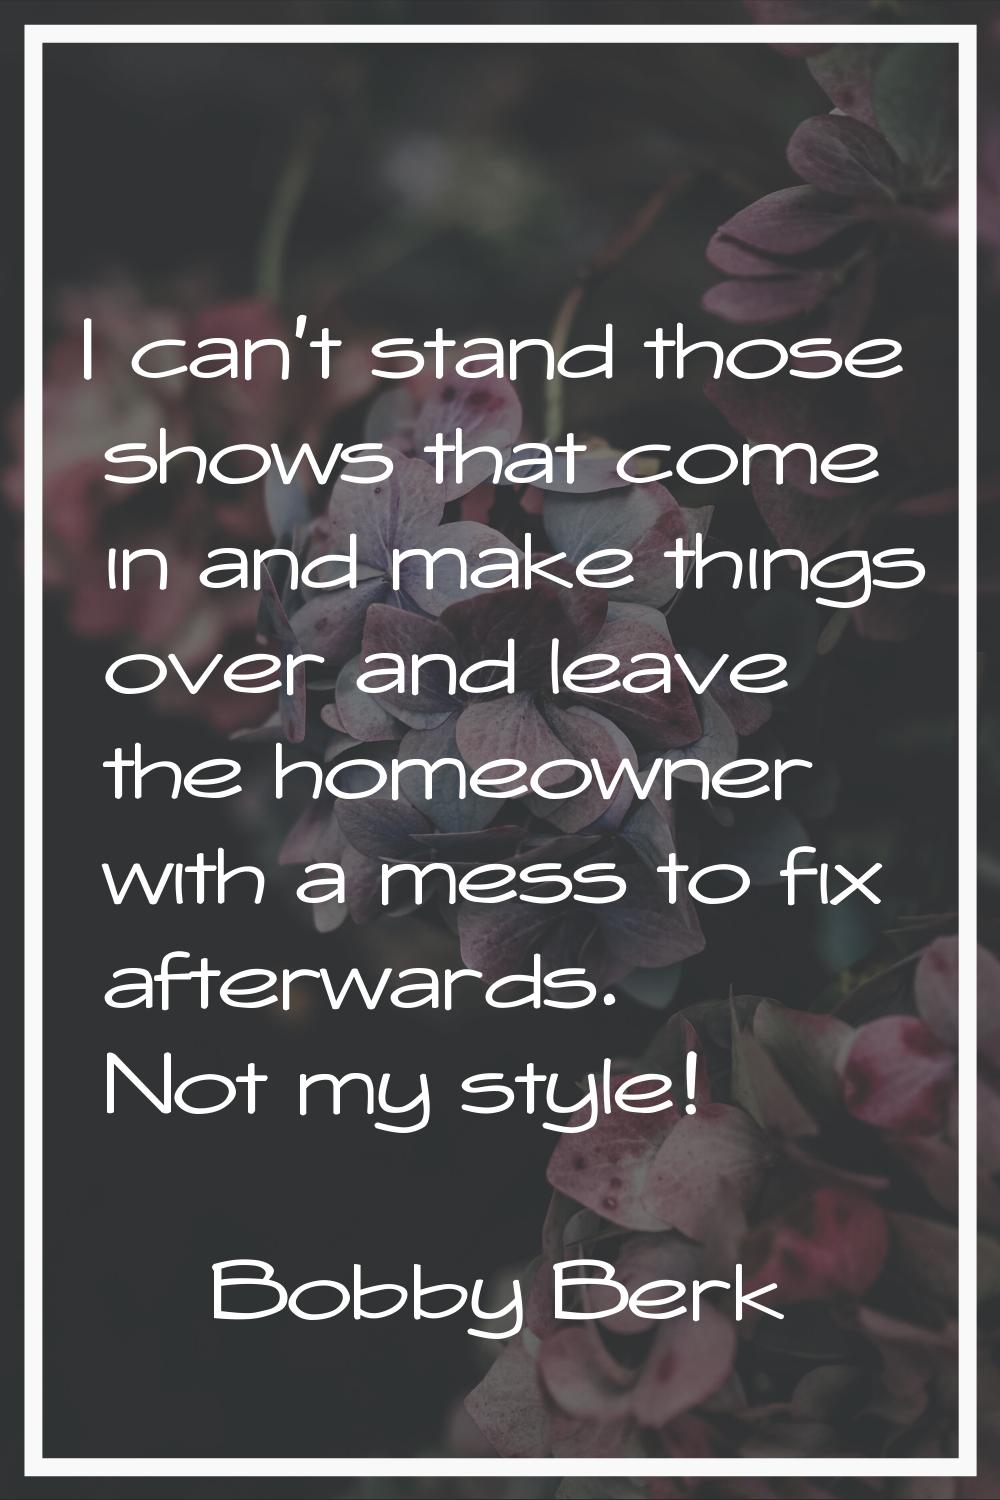 I can't stand those shows that come in and make things over and leave the homeowner with a mess to 